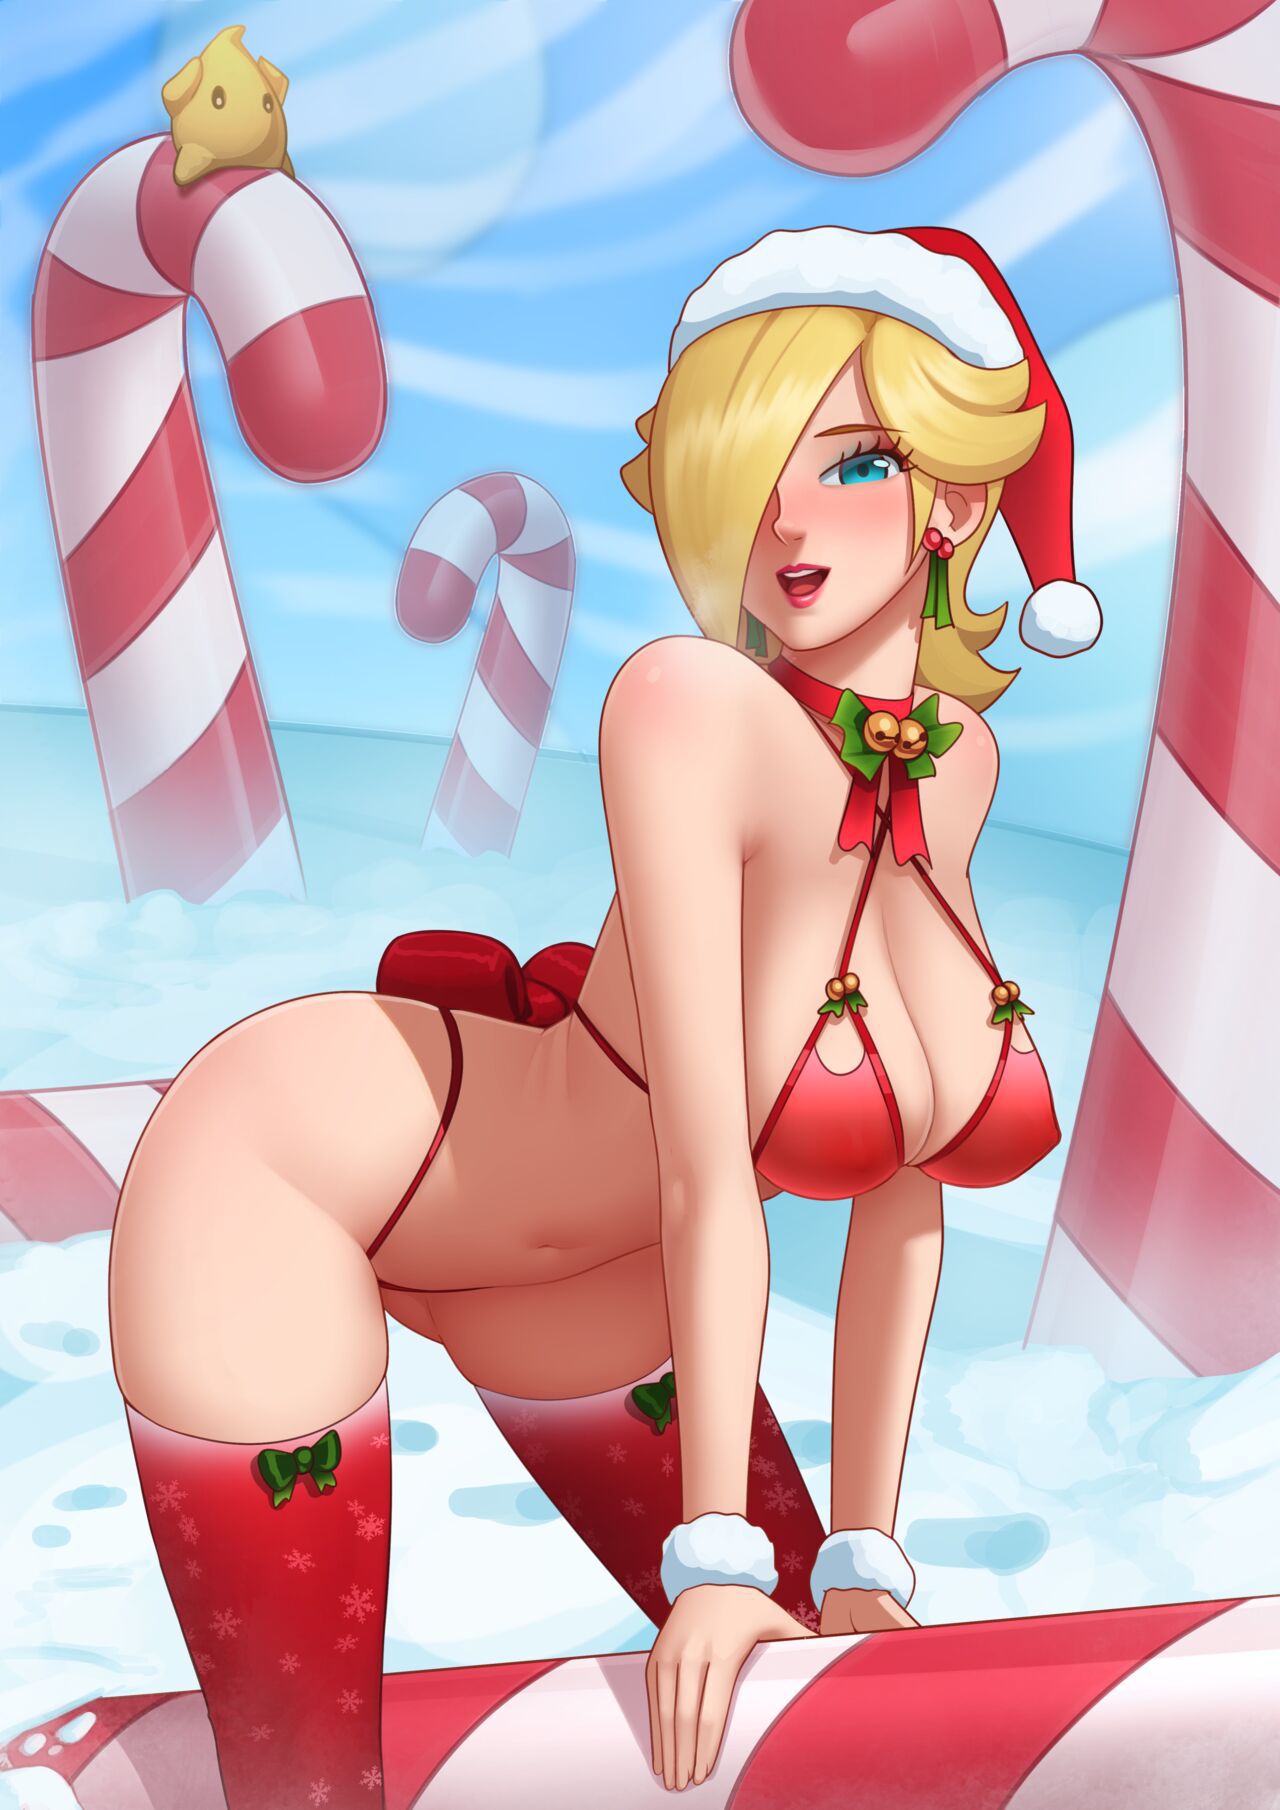 [Deilan12] Candy Canes Appeared 4